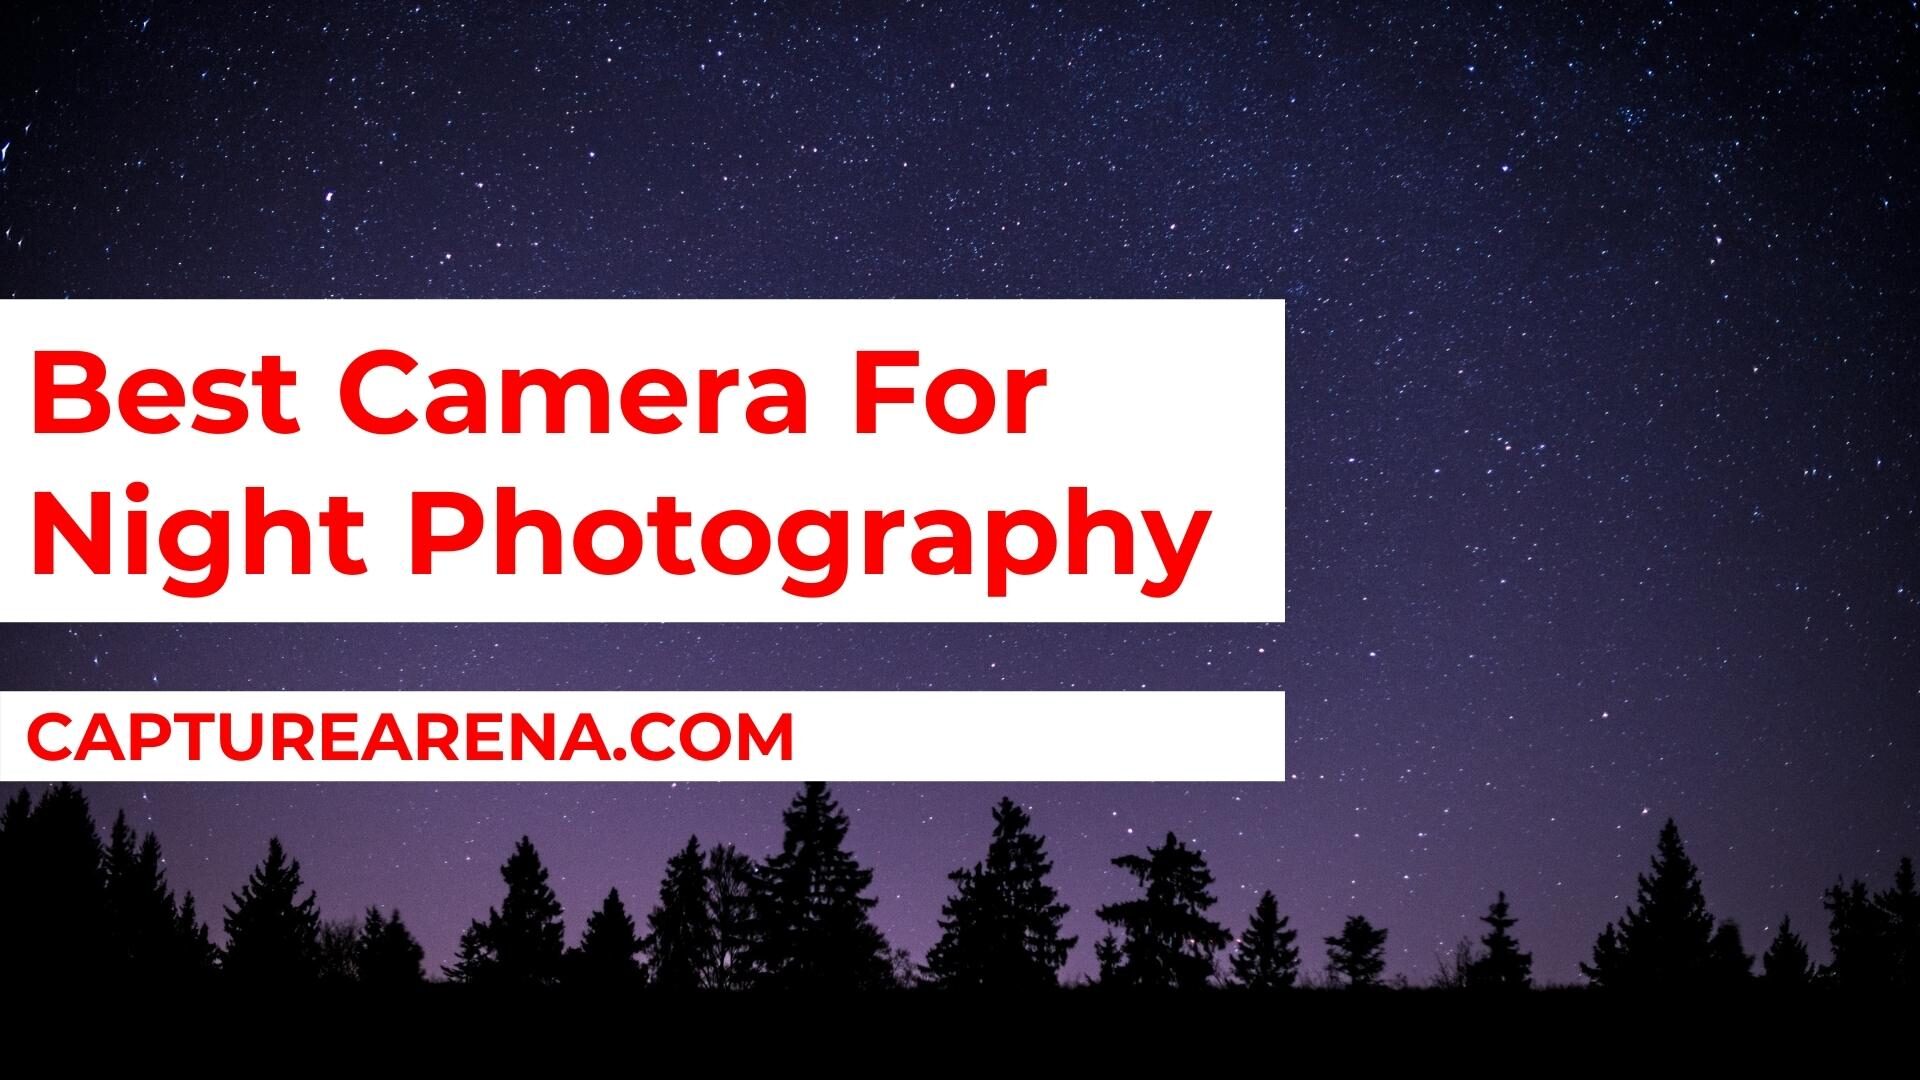 Best Camera For Night Photography